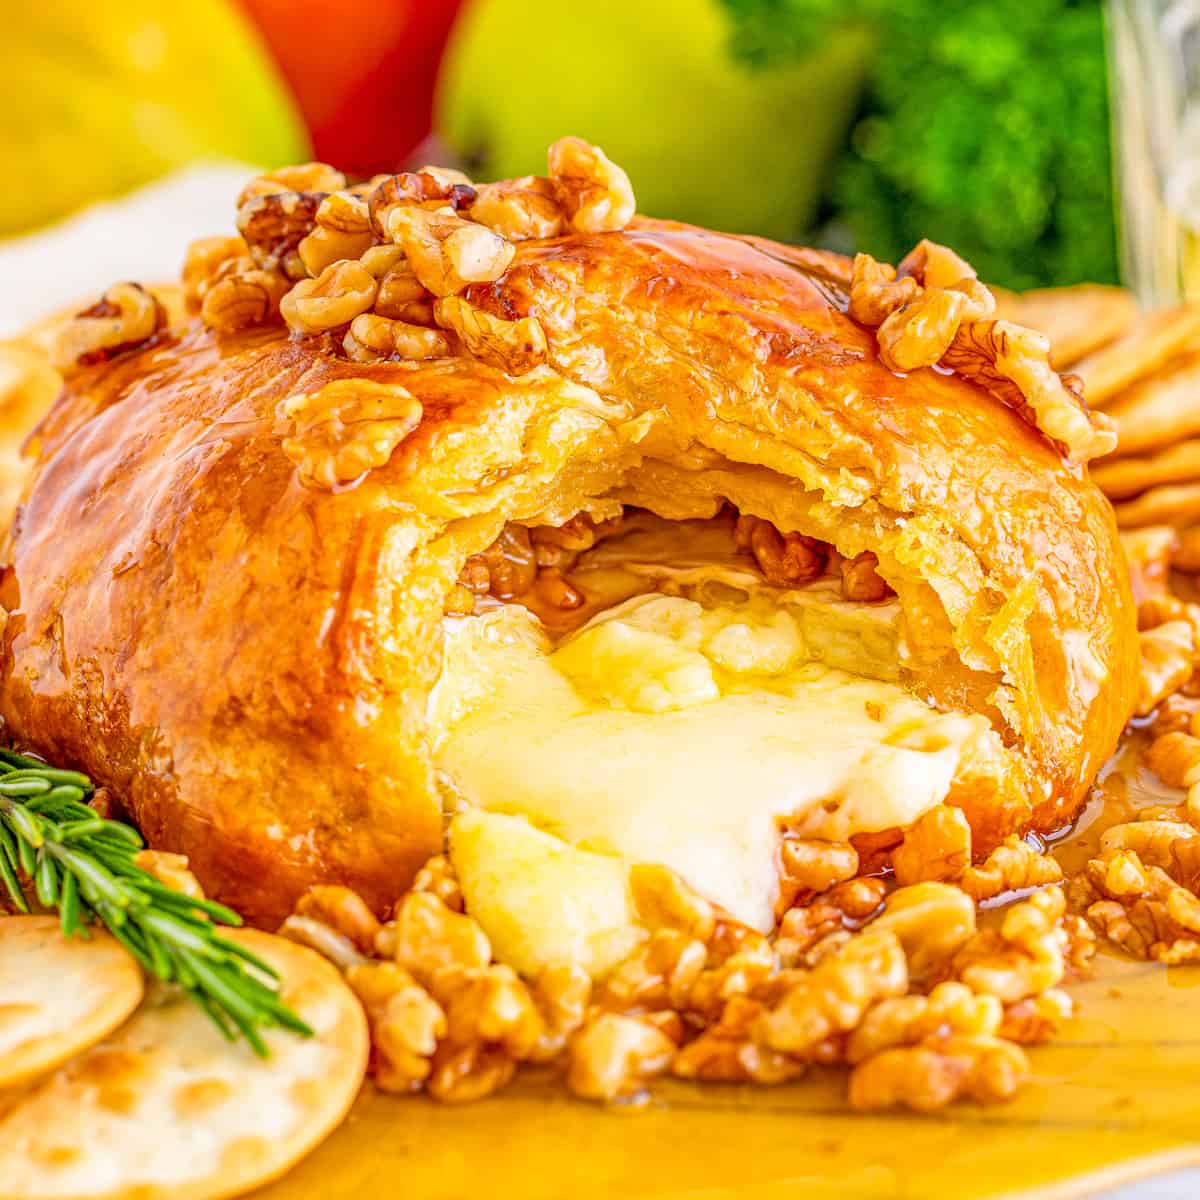 Baked Brie Recipe with Fruit and Walnuts